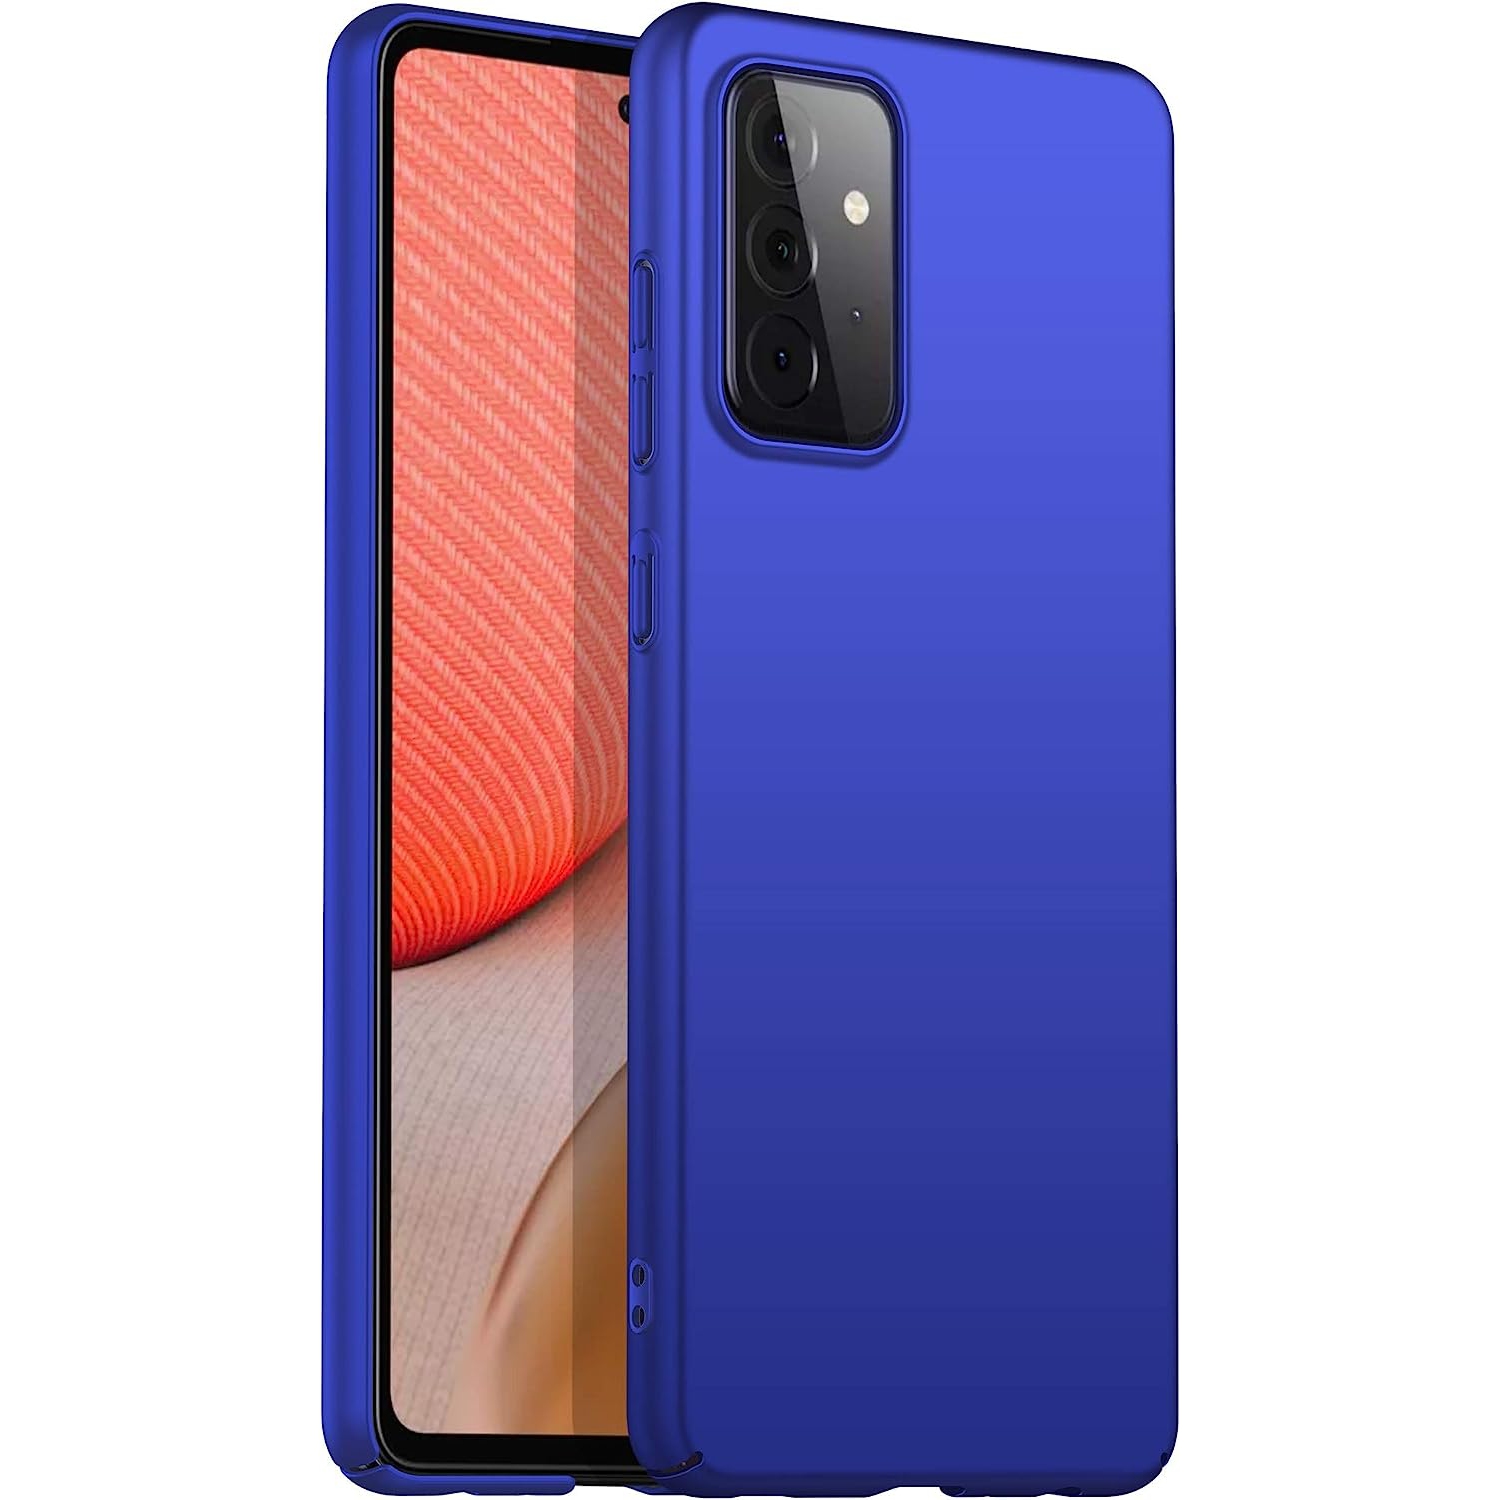 Samsung Galaxy A52 5G Case, Anti-Slip, Drop-Resistant, Anti-Fingerprint, Shock-Proof, Friction-Resistant,Thin and Light, for Samsung Galaxy A52 5G (Blue)